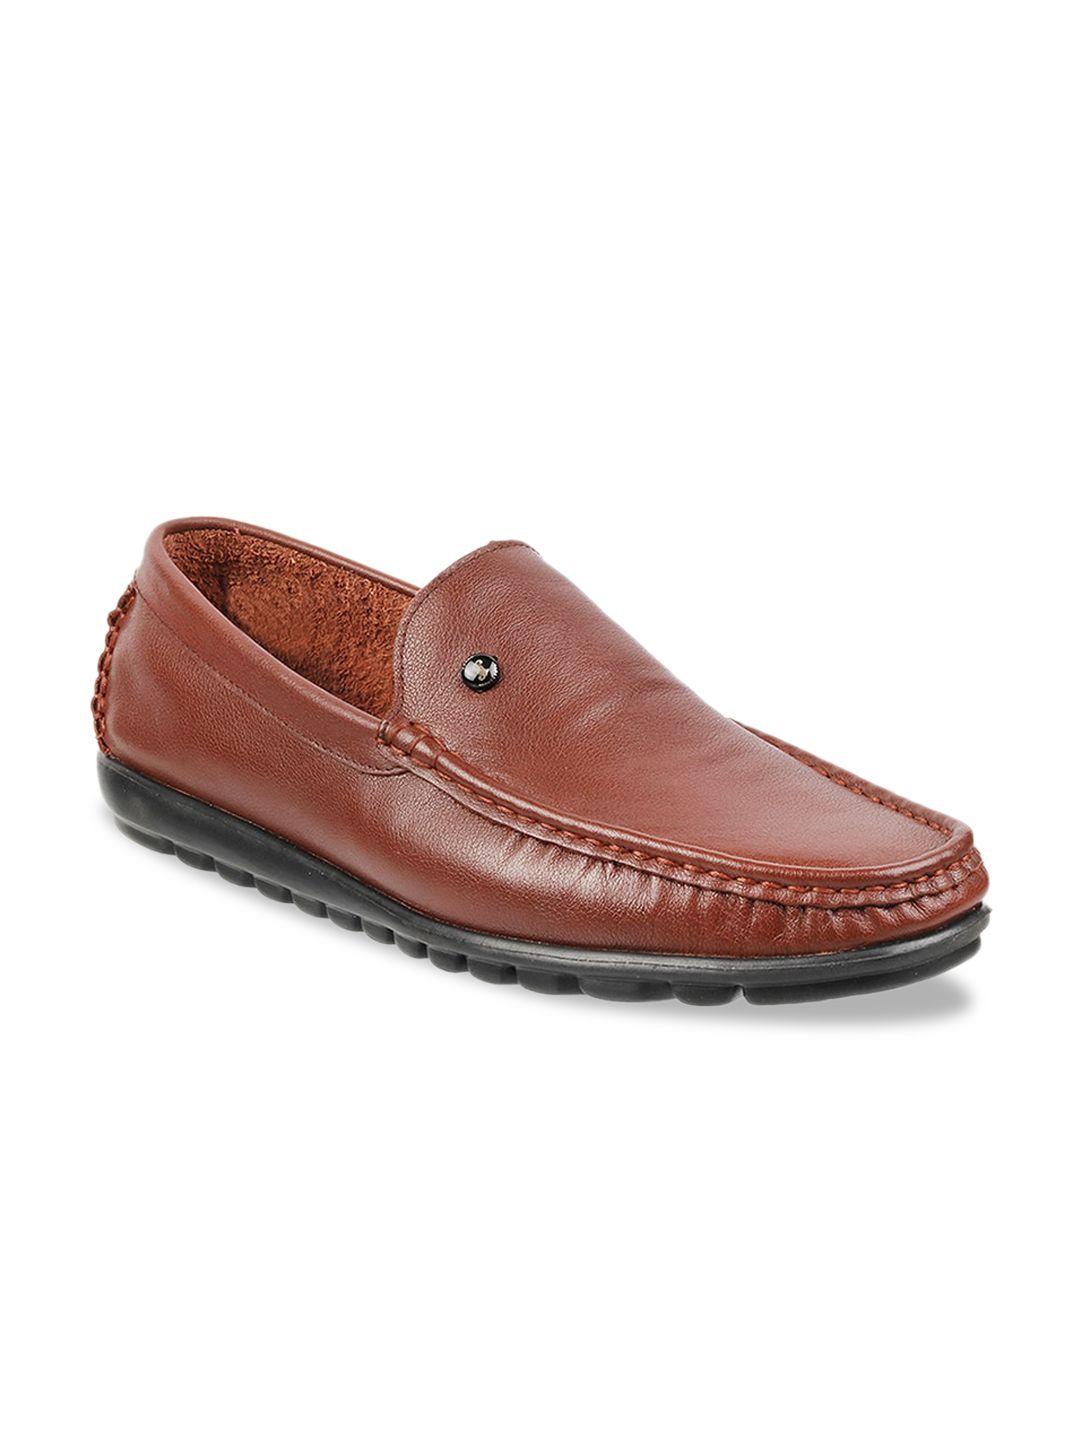 j fontini men brown leather loafers